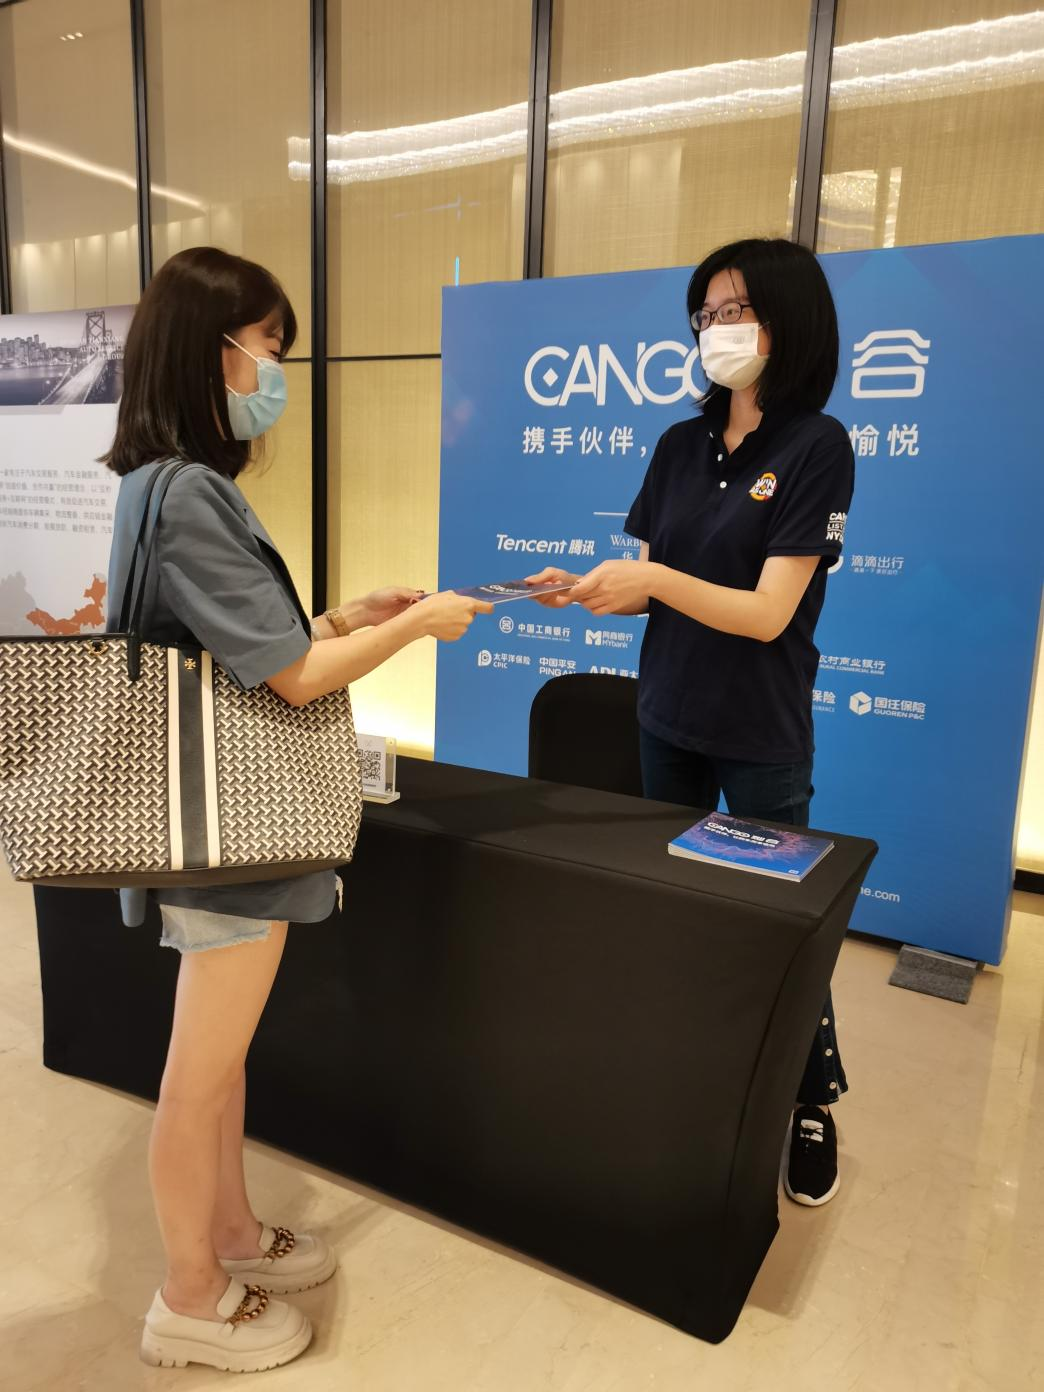 Cango Attended 2021 China Auto Finance Industry Summit